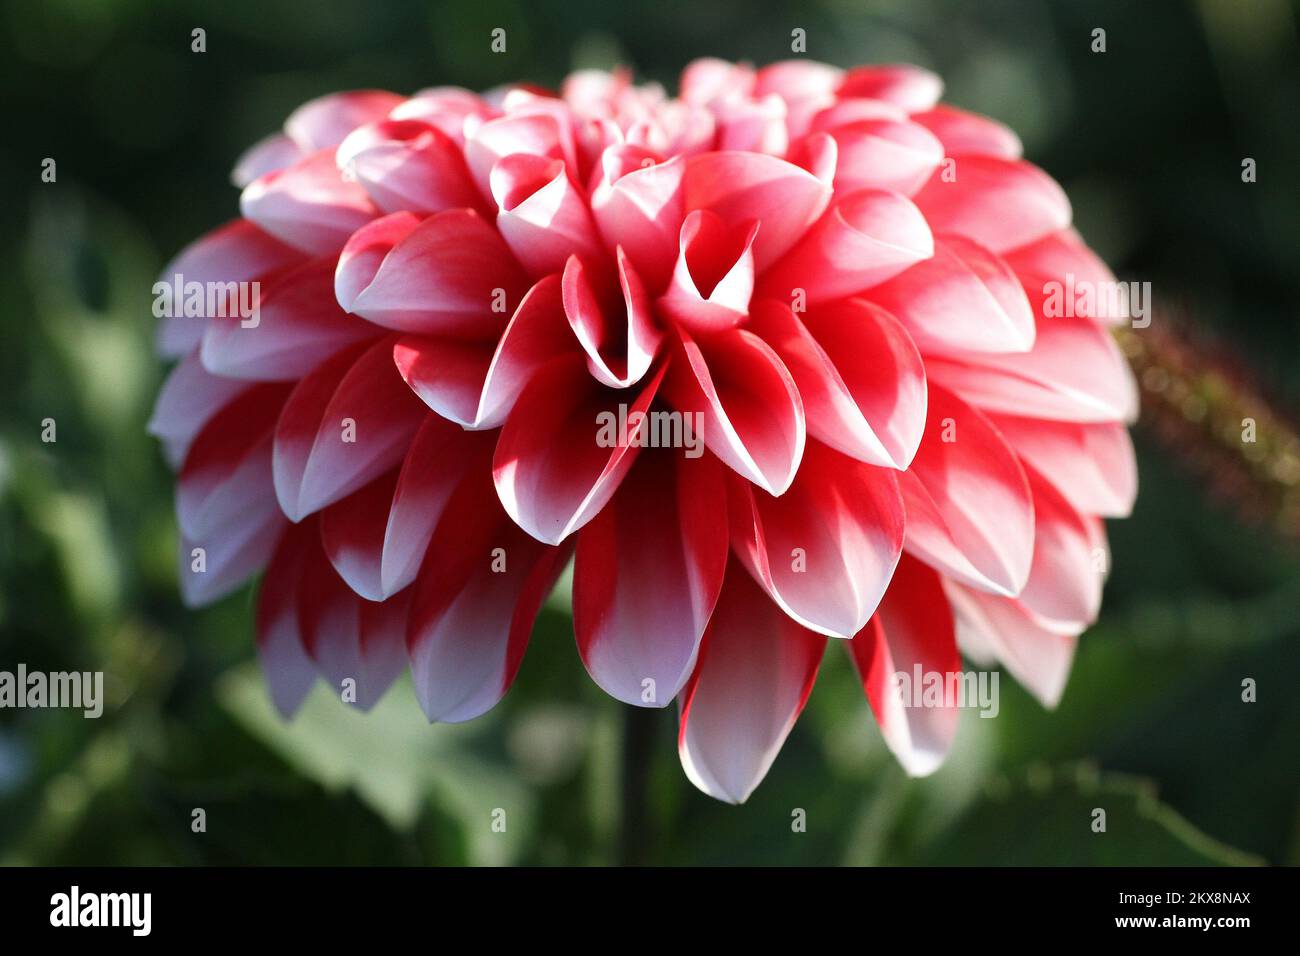 08.10.2018., Zagreb - Dahlia flower Dahlias are colorful spiky flowers which generally bloom from midsummer to first frost, when many other plants are past their best. Dahlias come in a rainbow of colors and even range in size, from the giant 10-inch â€œdinnerplateâ€ blooms to the 2-inch lollipop-style pompons. Most varieties grow 4 to 5 feet tall. Photo: Patrik Macek/PIXSELL  Stock Photo